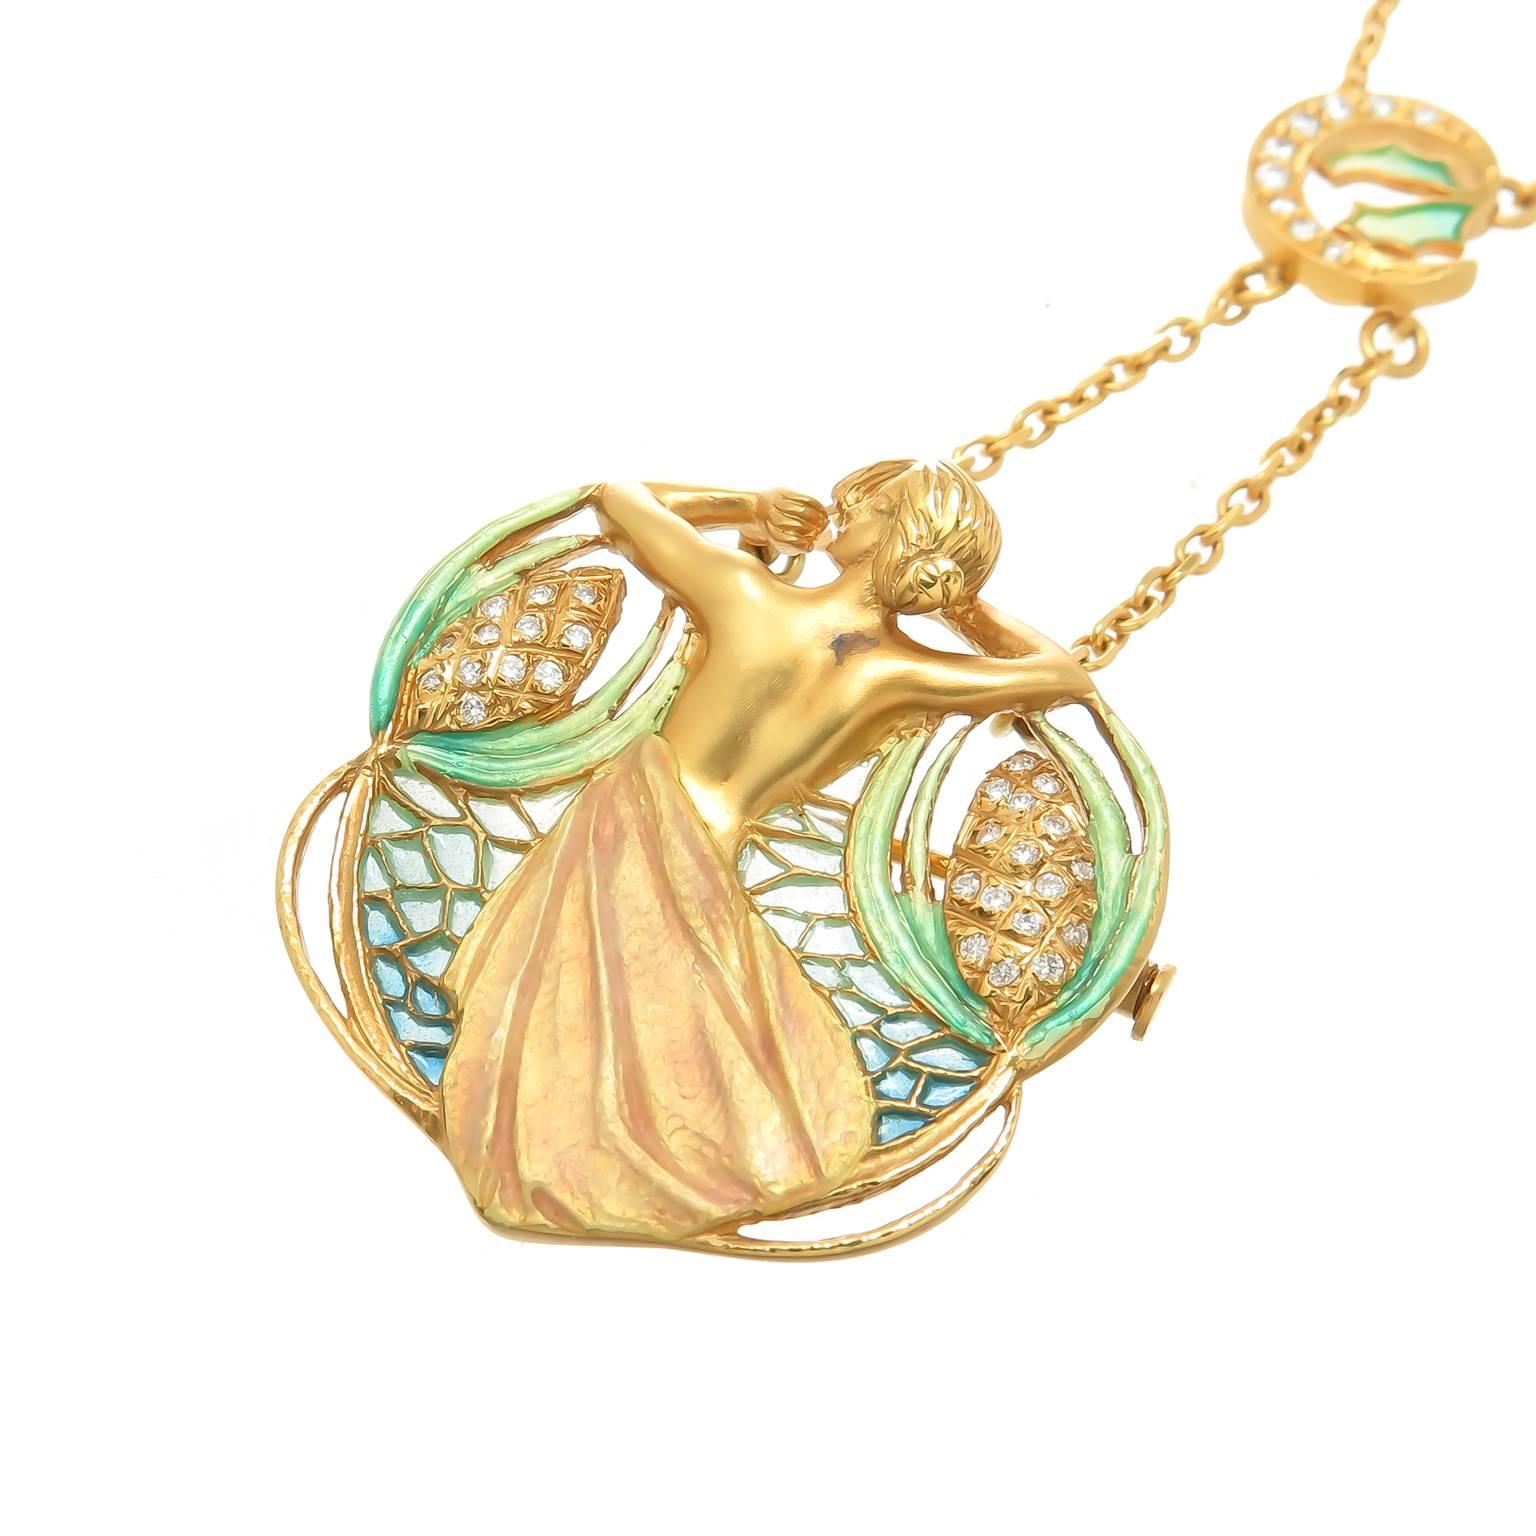 Circa 1990s Masriera of Barcelona Spain 18K yellow Gold pendant with removable chain to also be worn as a Brooch. incredible detail in the Art Nouveau style with textured and frosted gold, Plique-A-Jour Enamel and further accented with Diamonds. The